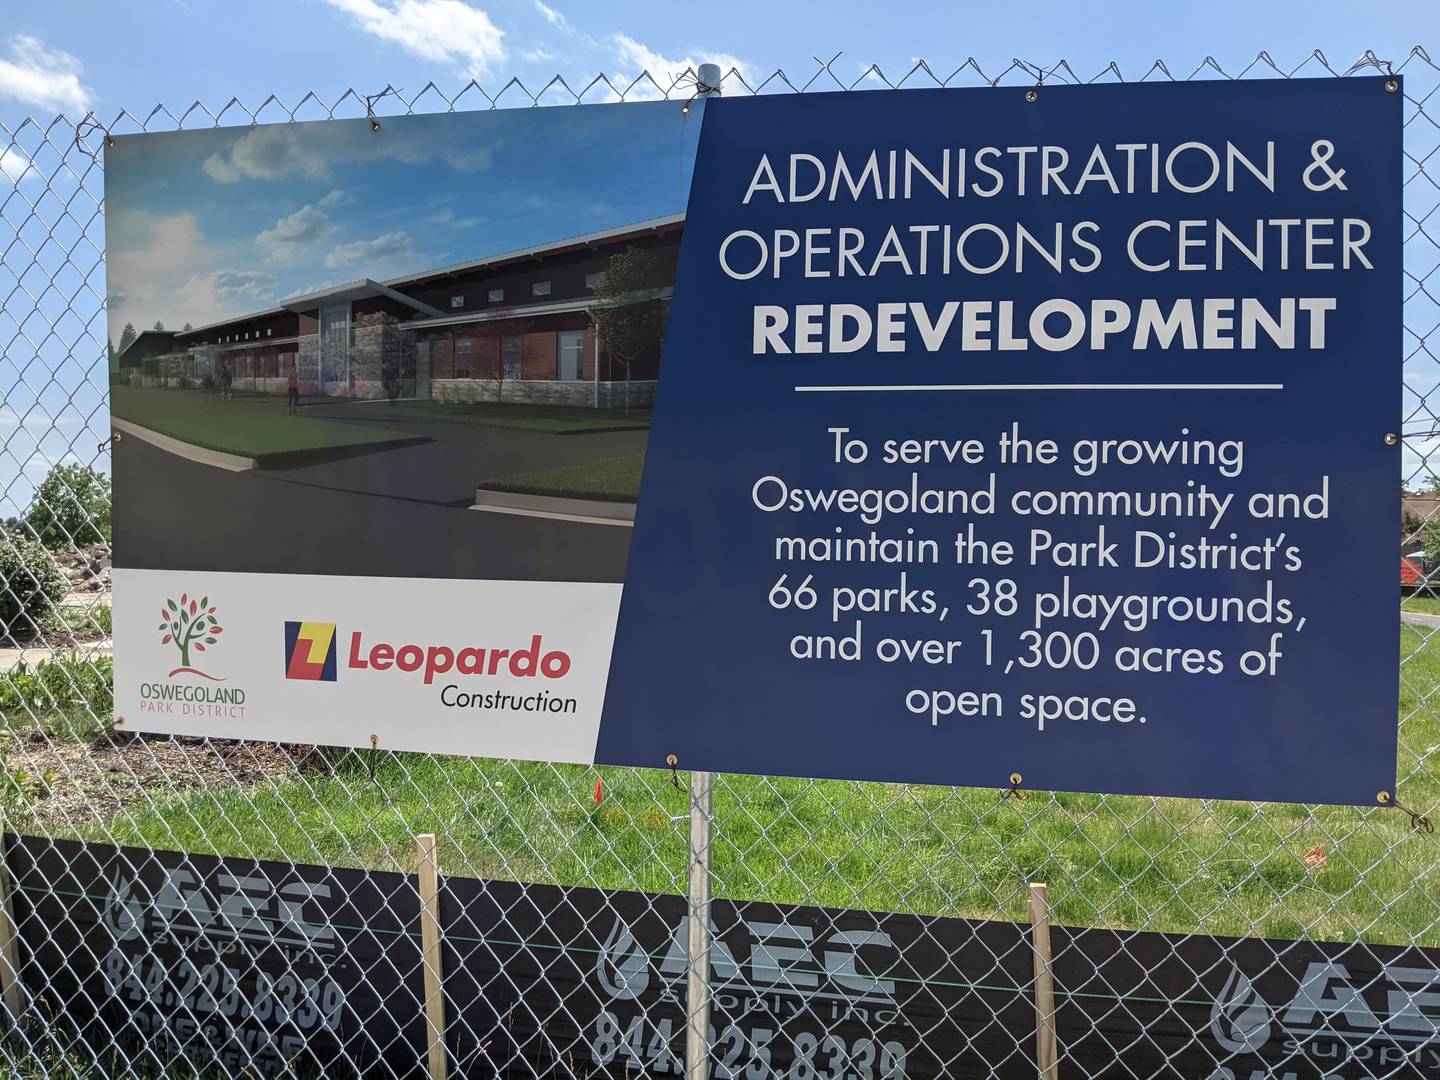 With Oswegoland Park District’s aging Prairie Point administration and operations center now razed, plans for its new building are moving forward.